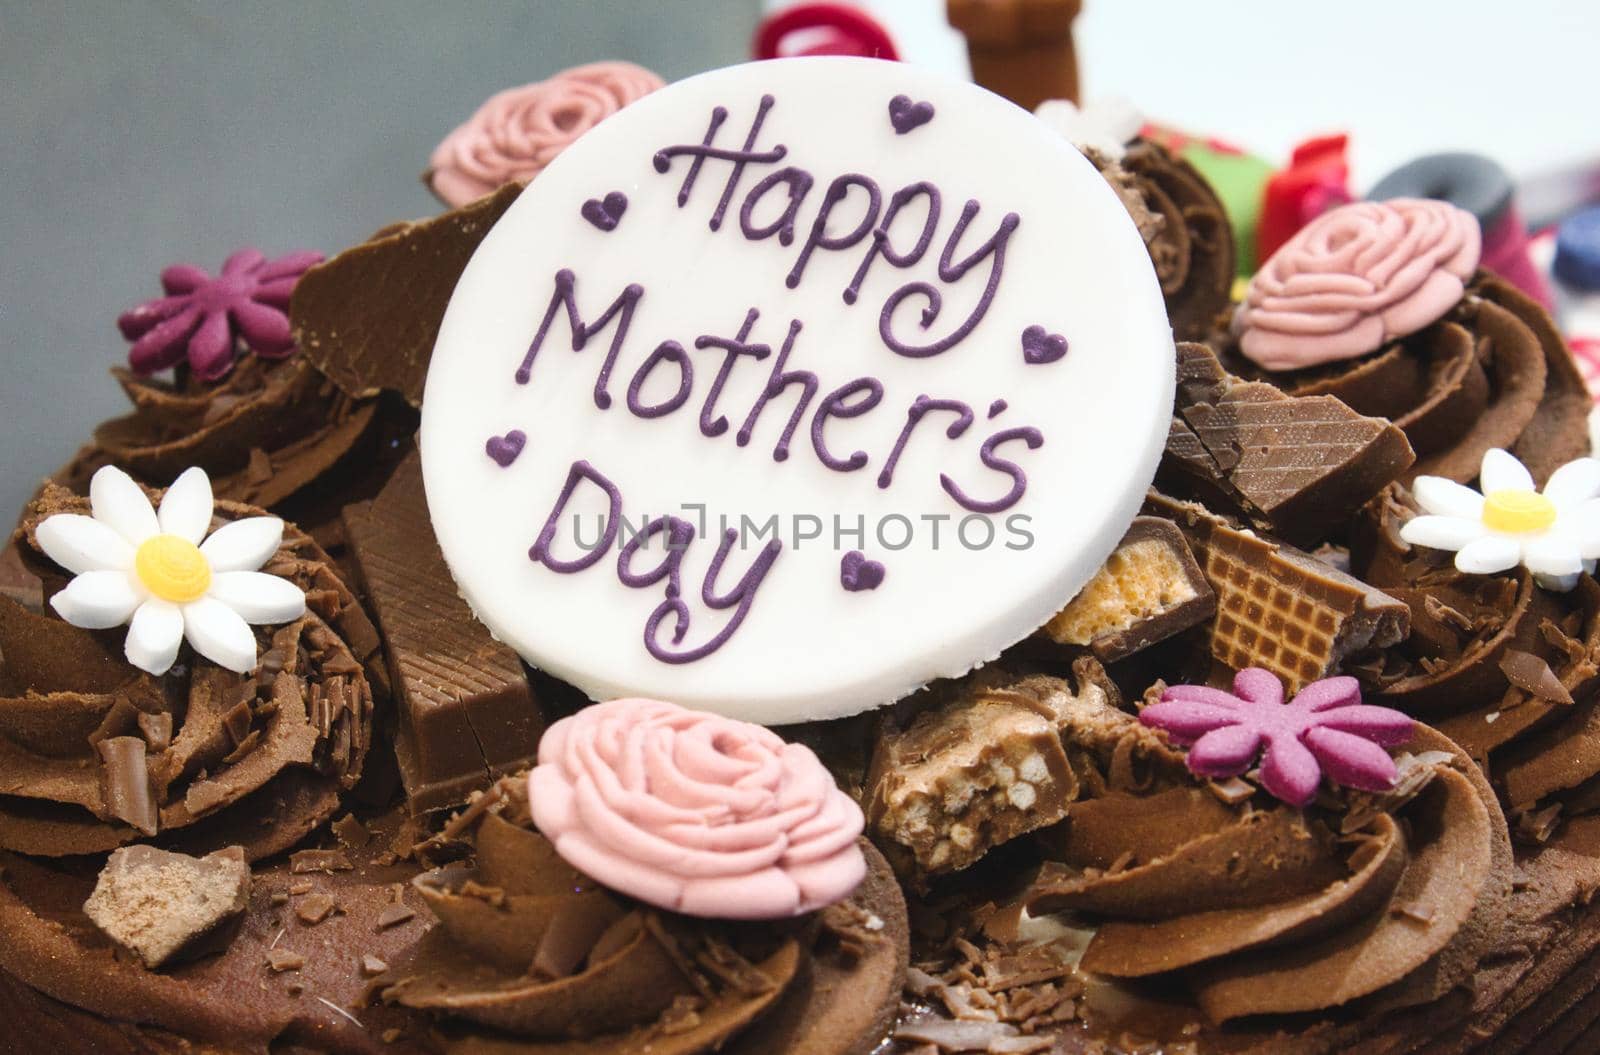 Happy Mother's Day cake with chocolate and marzipan icing by tennesseewitney